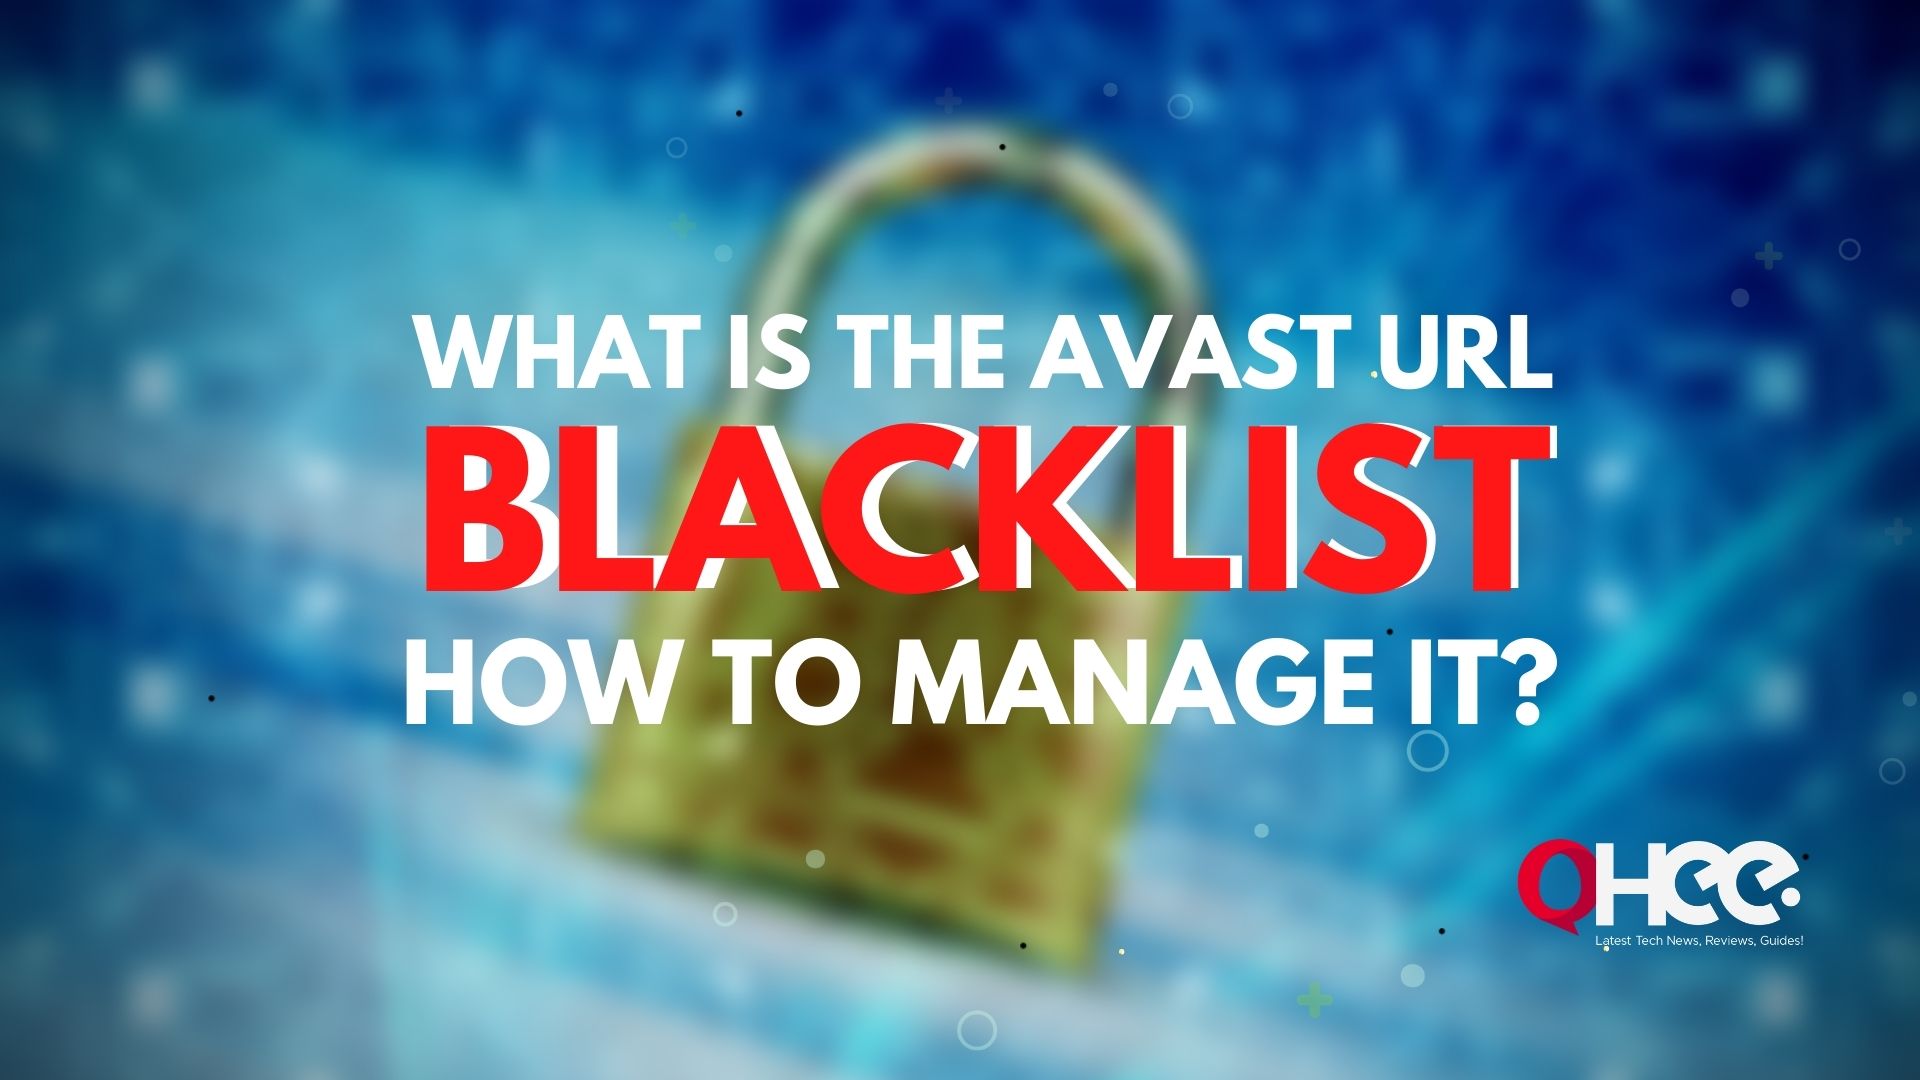 What is the Avast URL blacklist and How to Manage it?